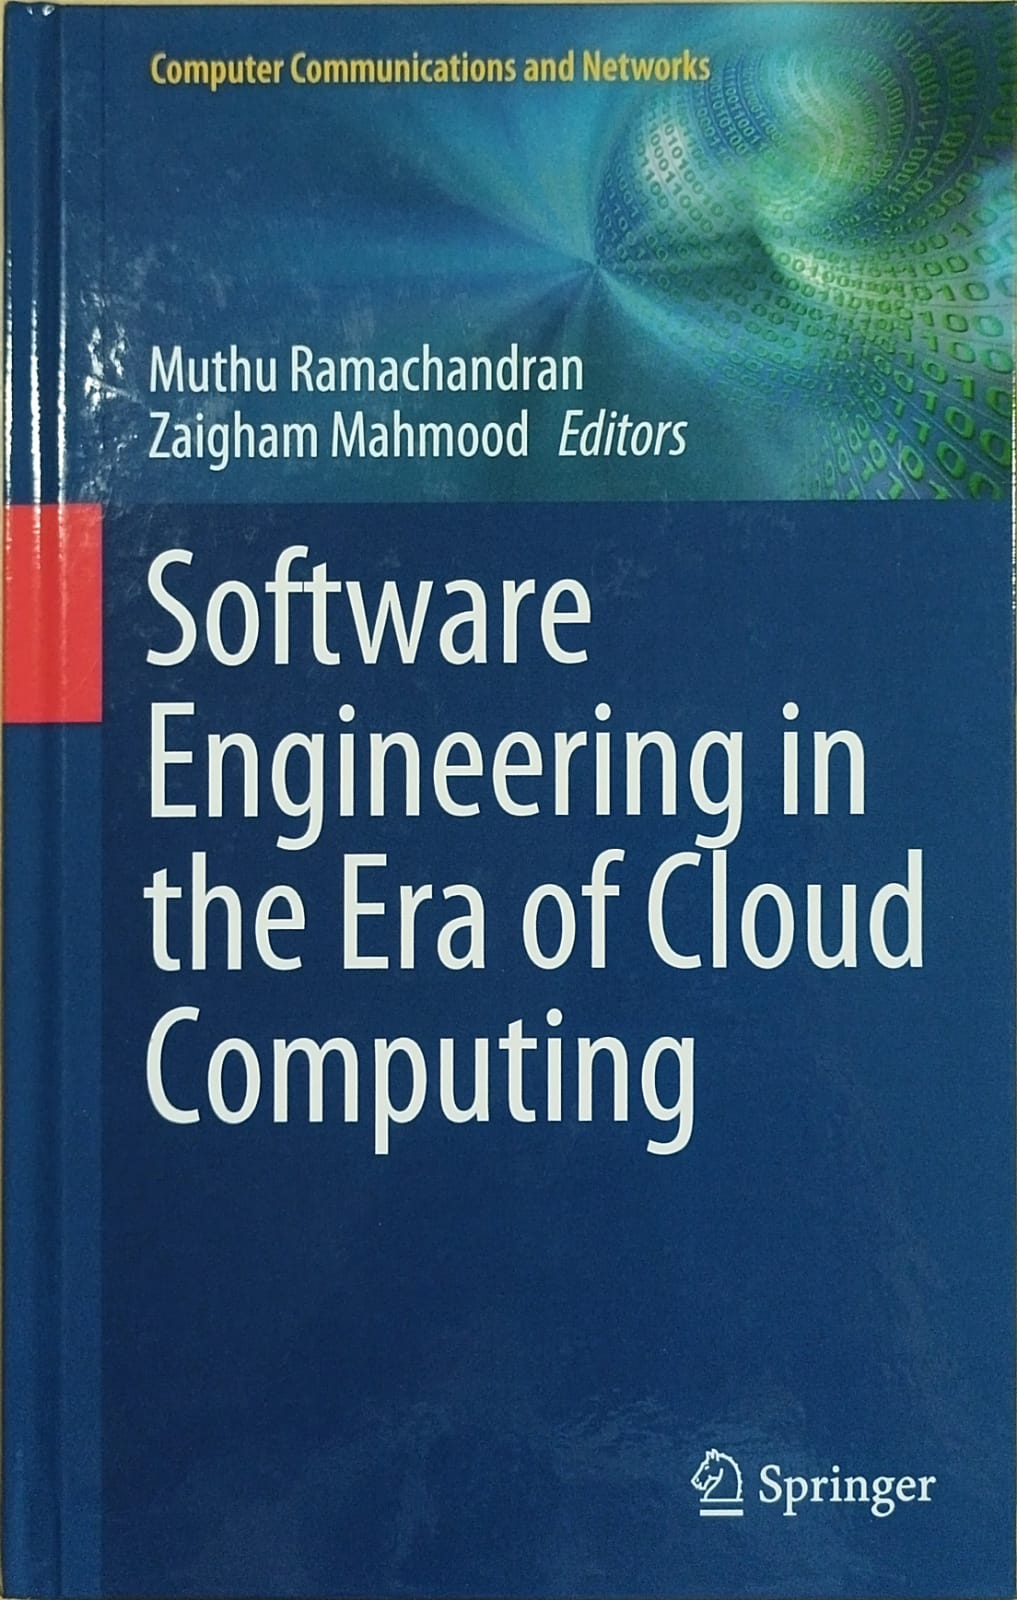 Software engineering in the era of cloud computing